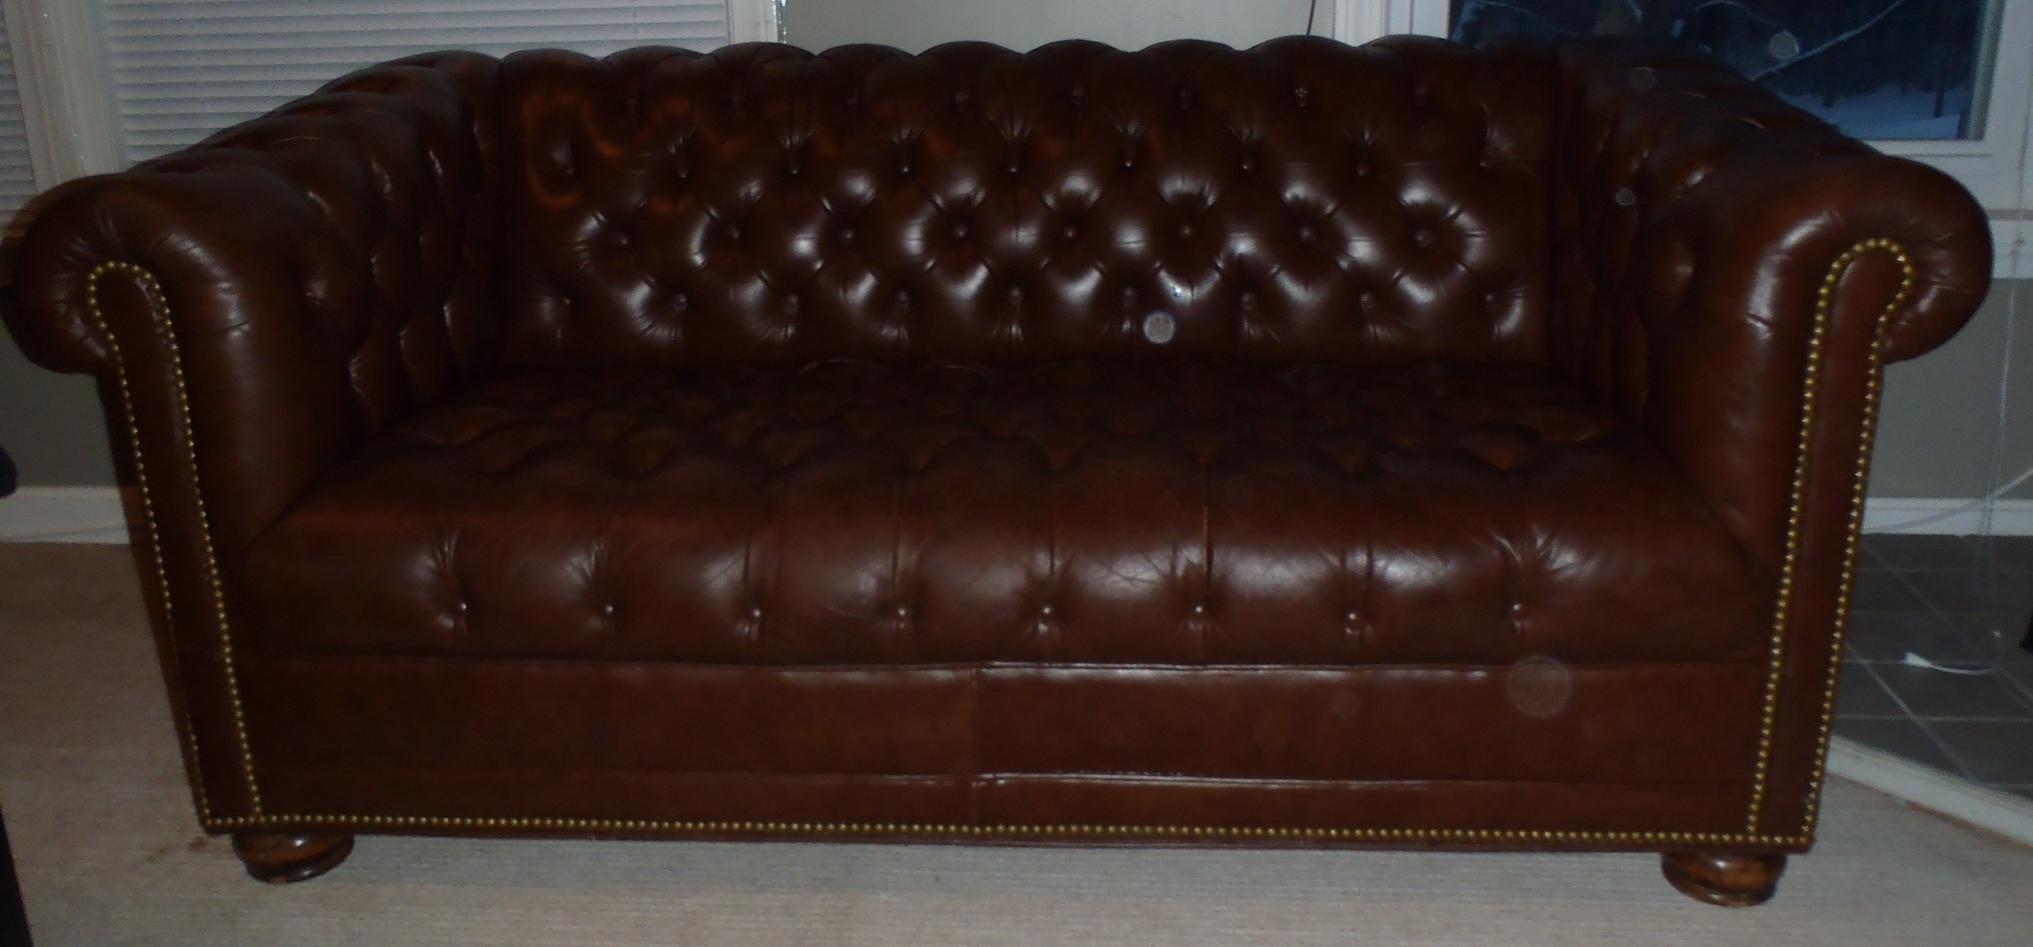 A Few Questions On This Vintage Hancock And Moore Chesterfield